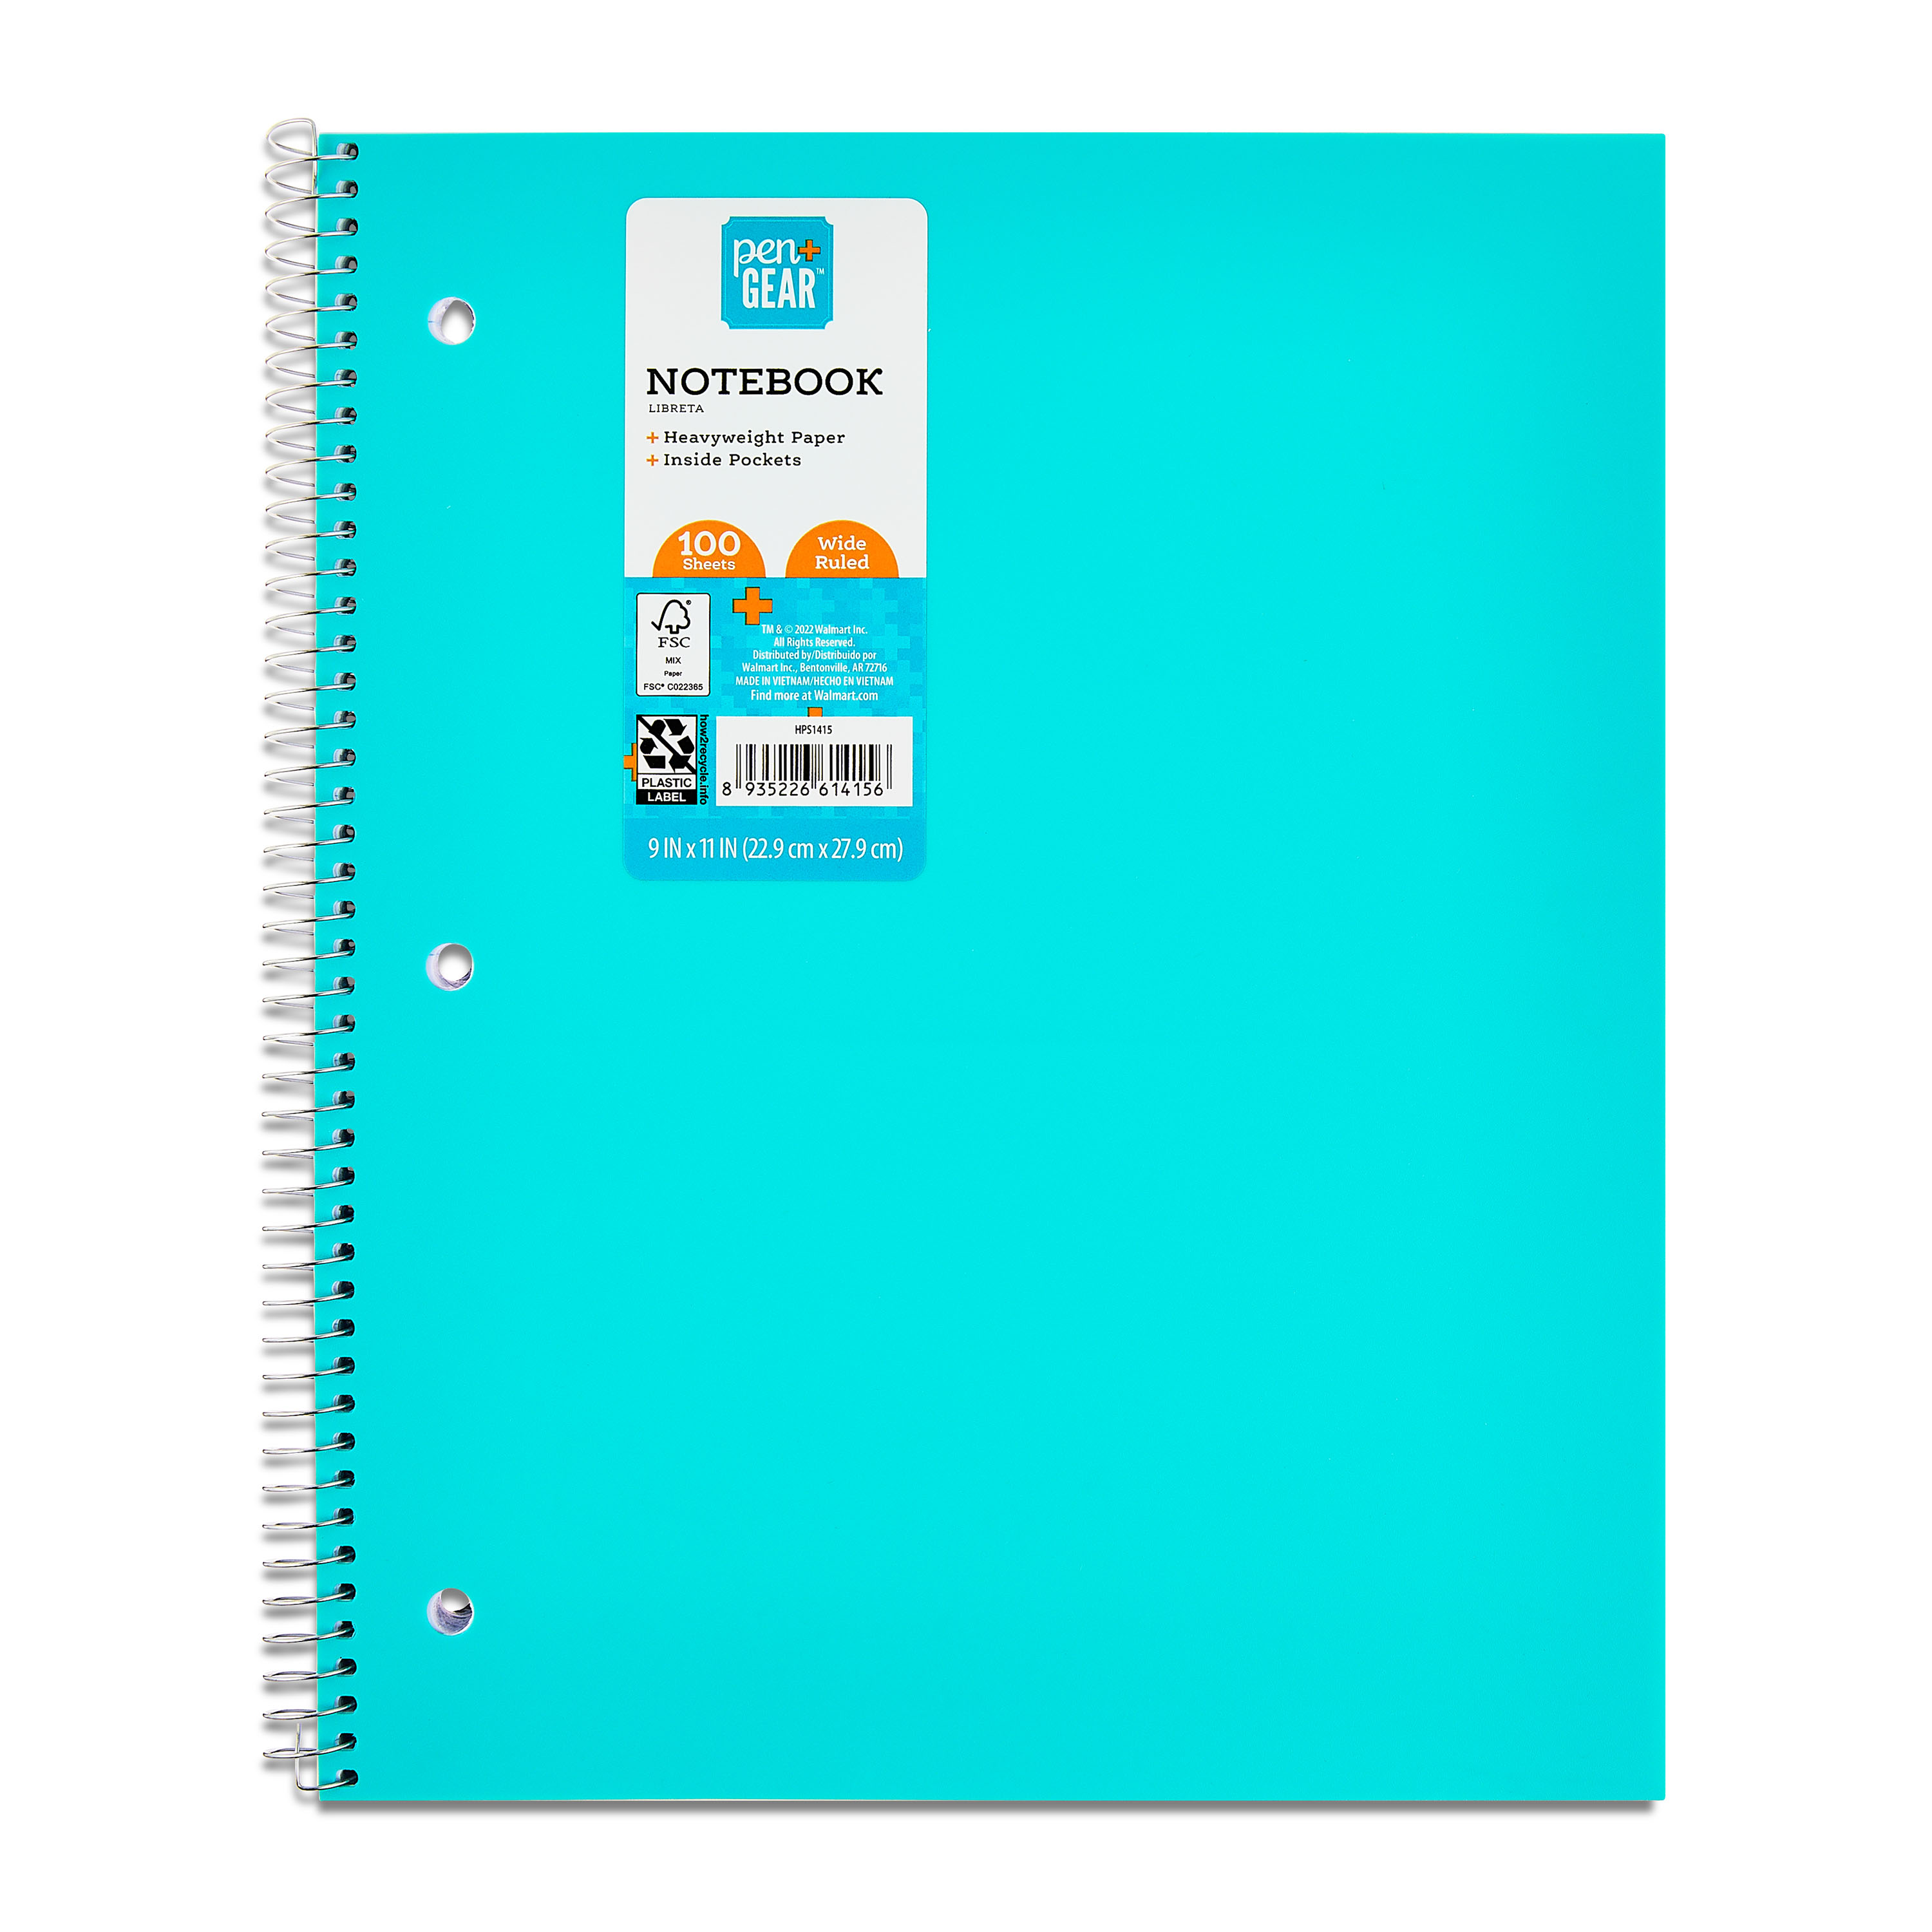 Pen + Gear Wide Ruled 1-Subject Notebook, 10.5" x 8", Blue, 100 Sheets - image 1 of 4